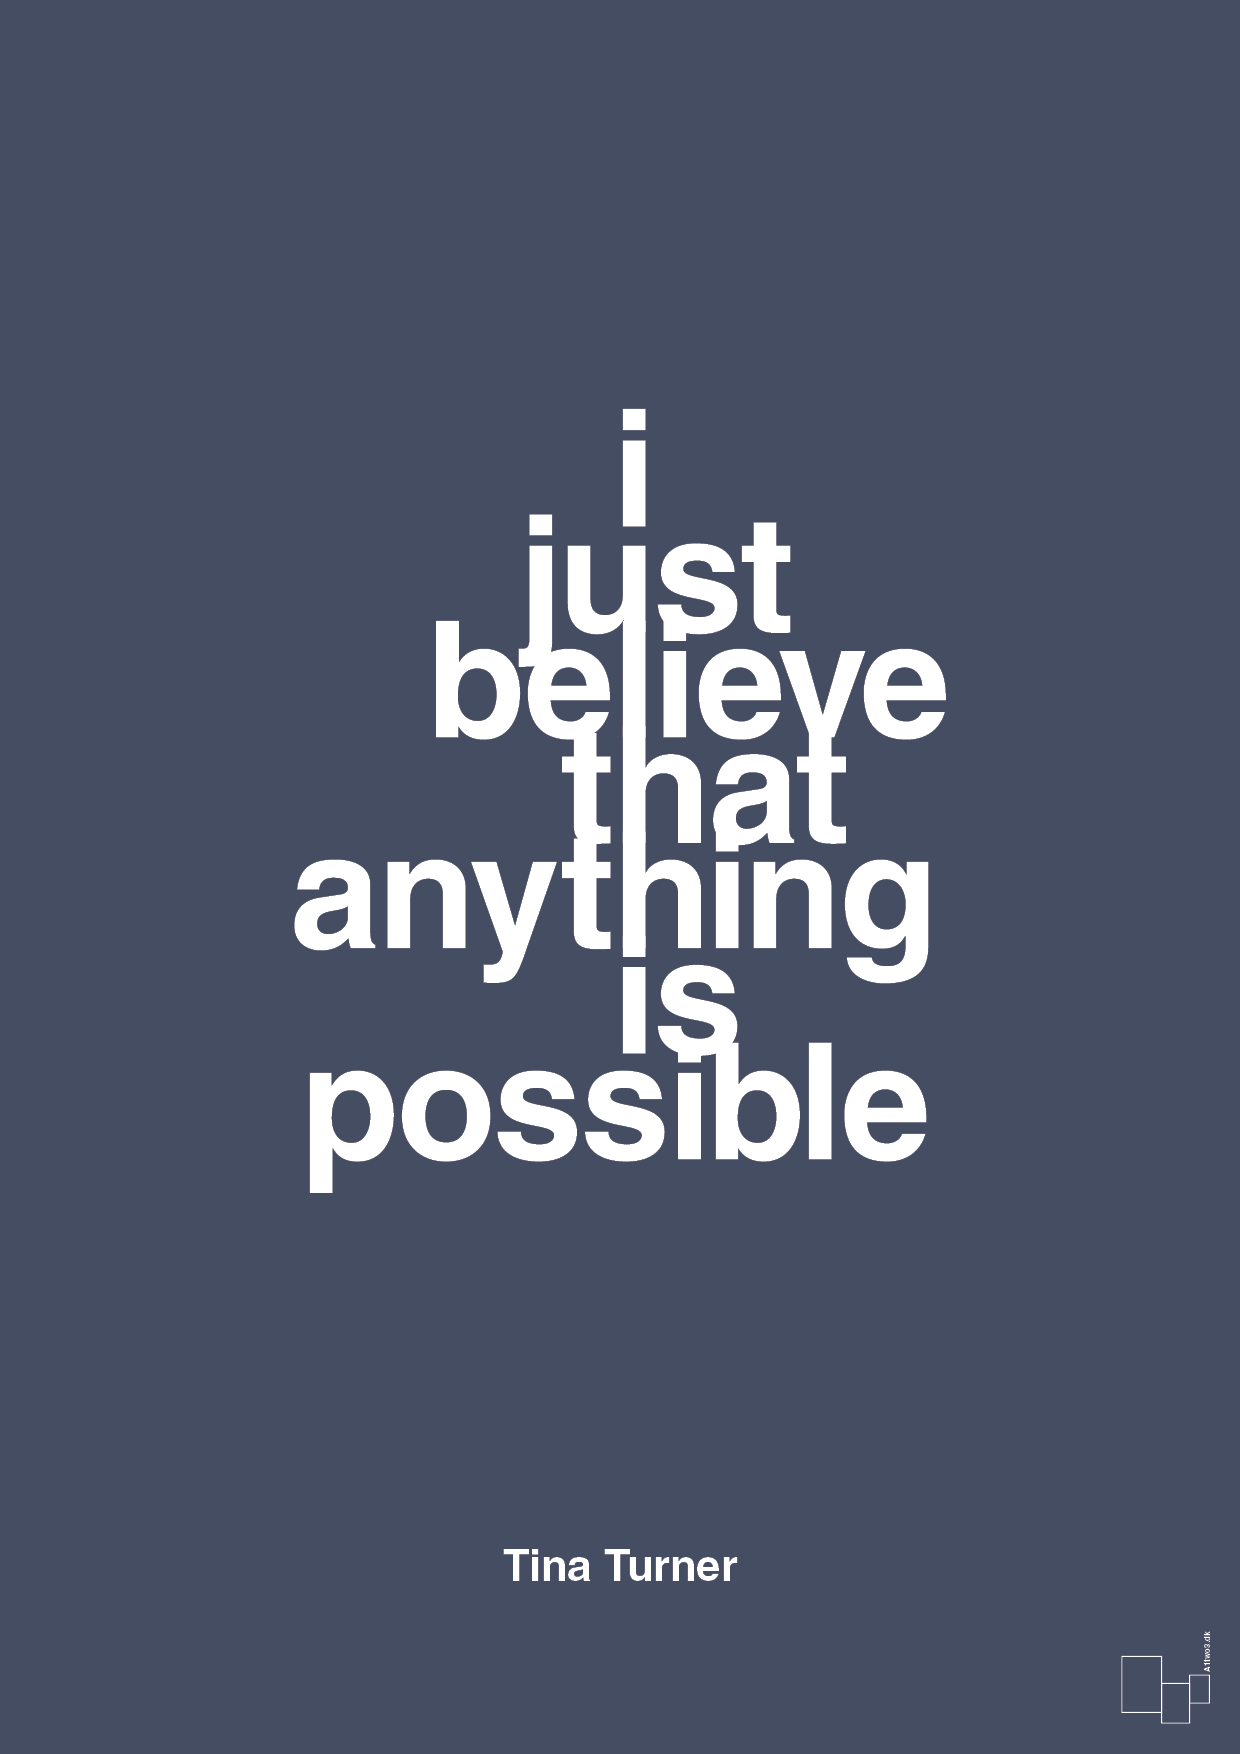 i just believe that anything is possible - Plakat med Citater i Petrol